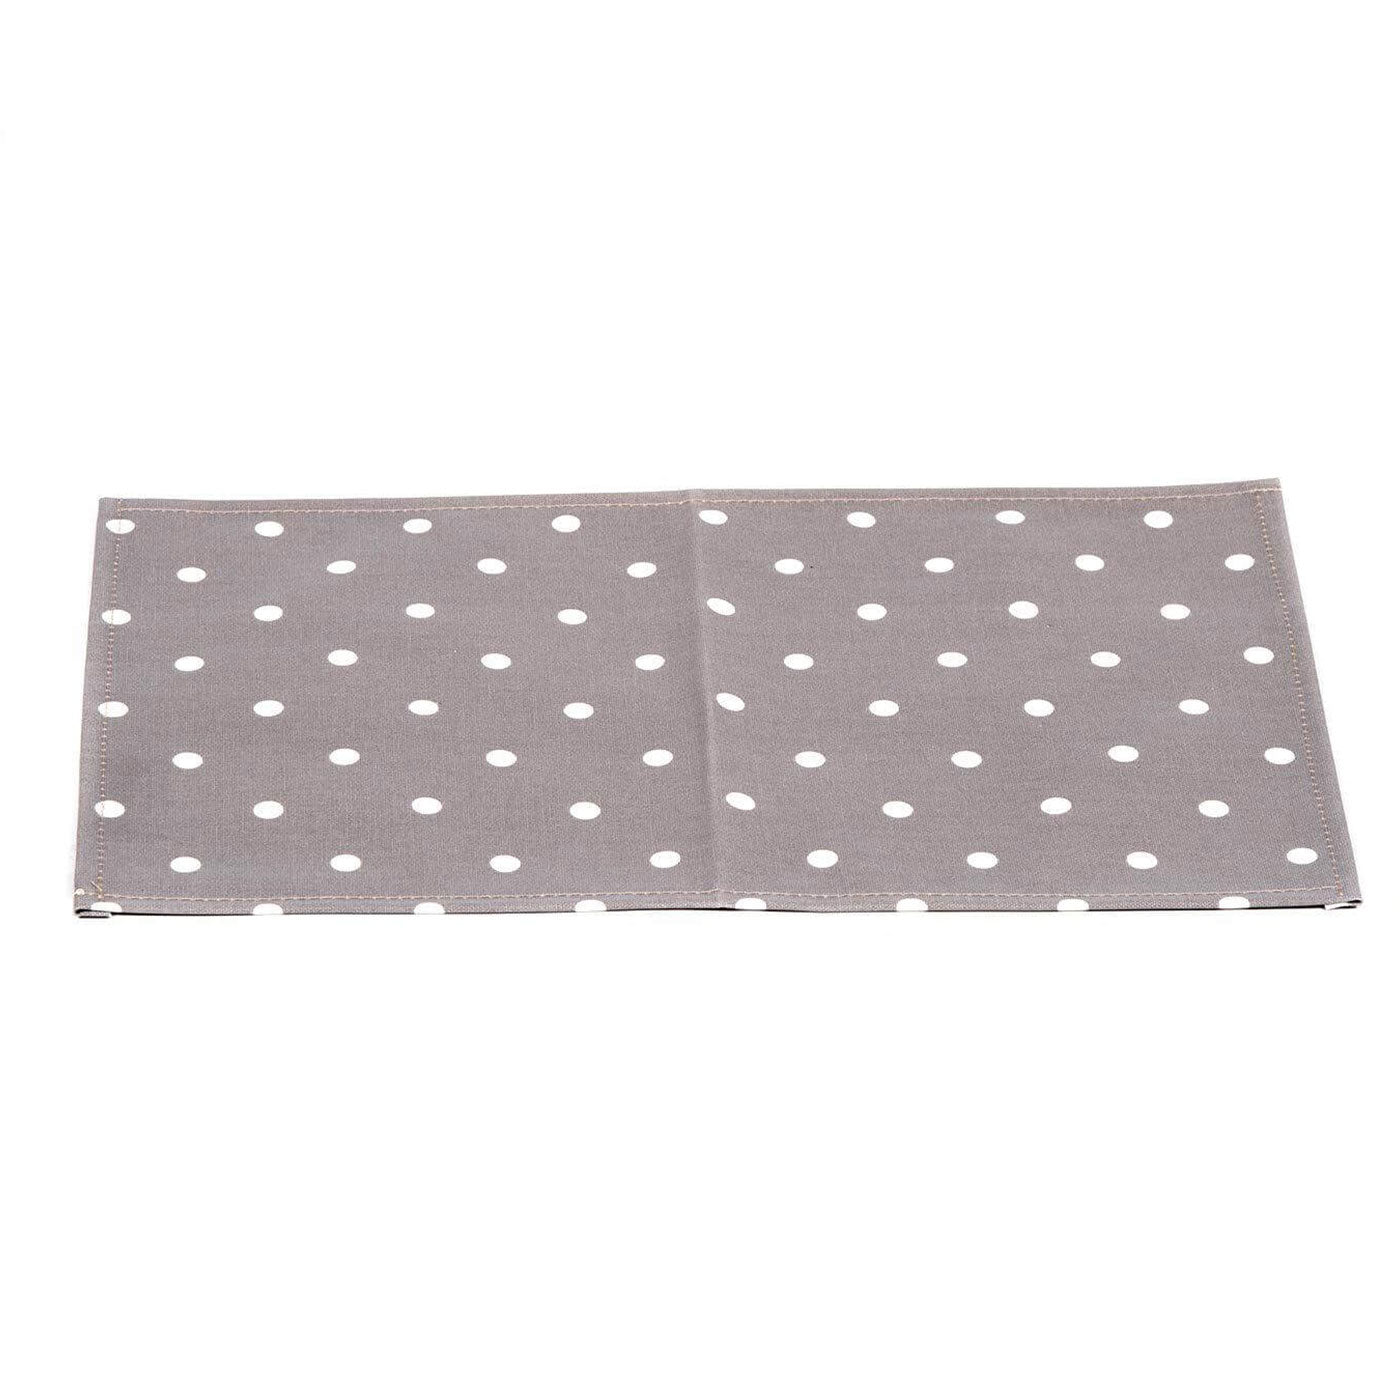 [colour:grey spot] Discover Pet Feeding Placemat in Grey Spot. Available at Lords and Labradors 